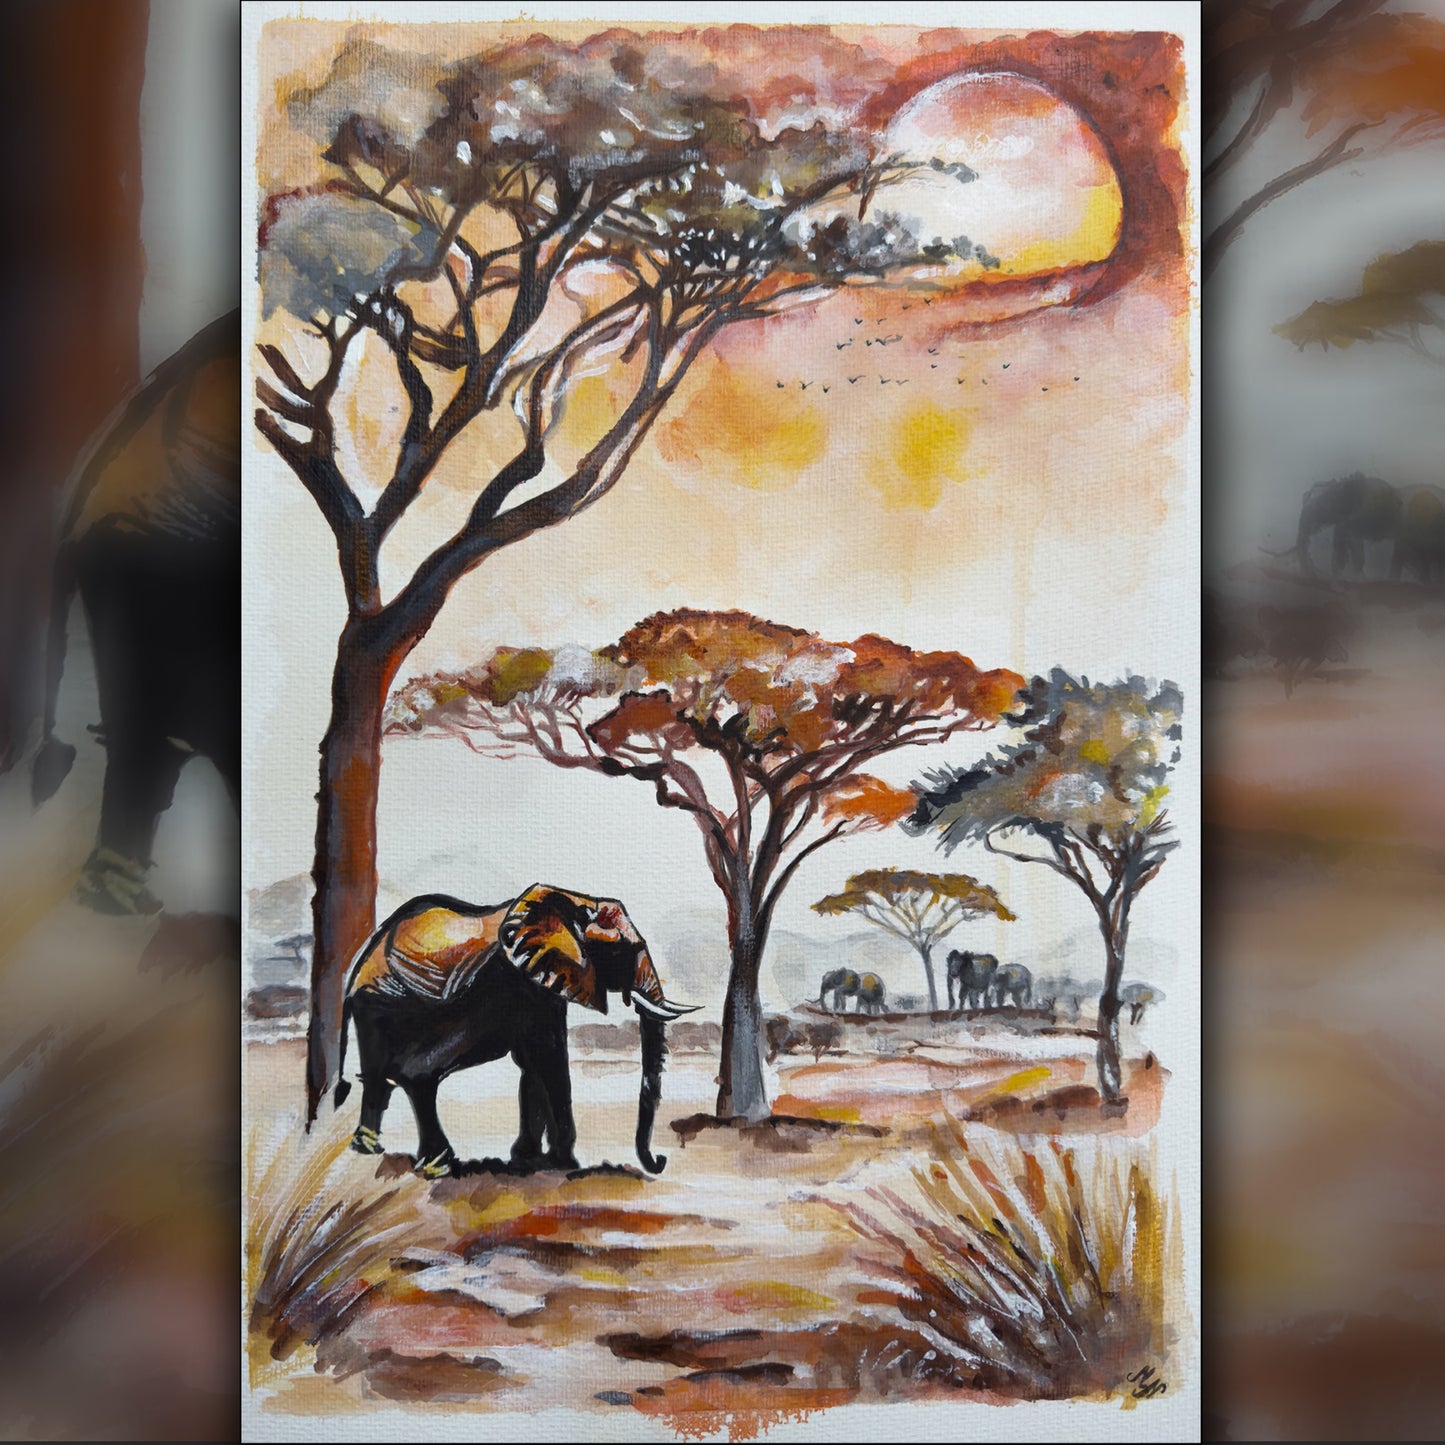 Captivating composition evoking the tranquility and allure of the African wilderness.